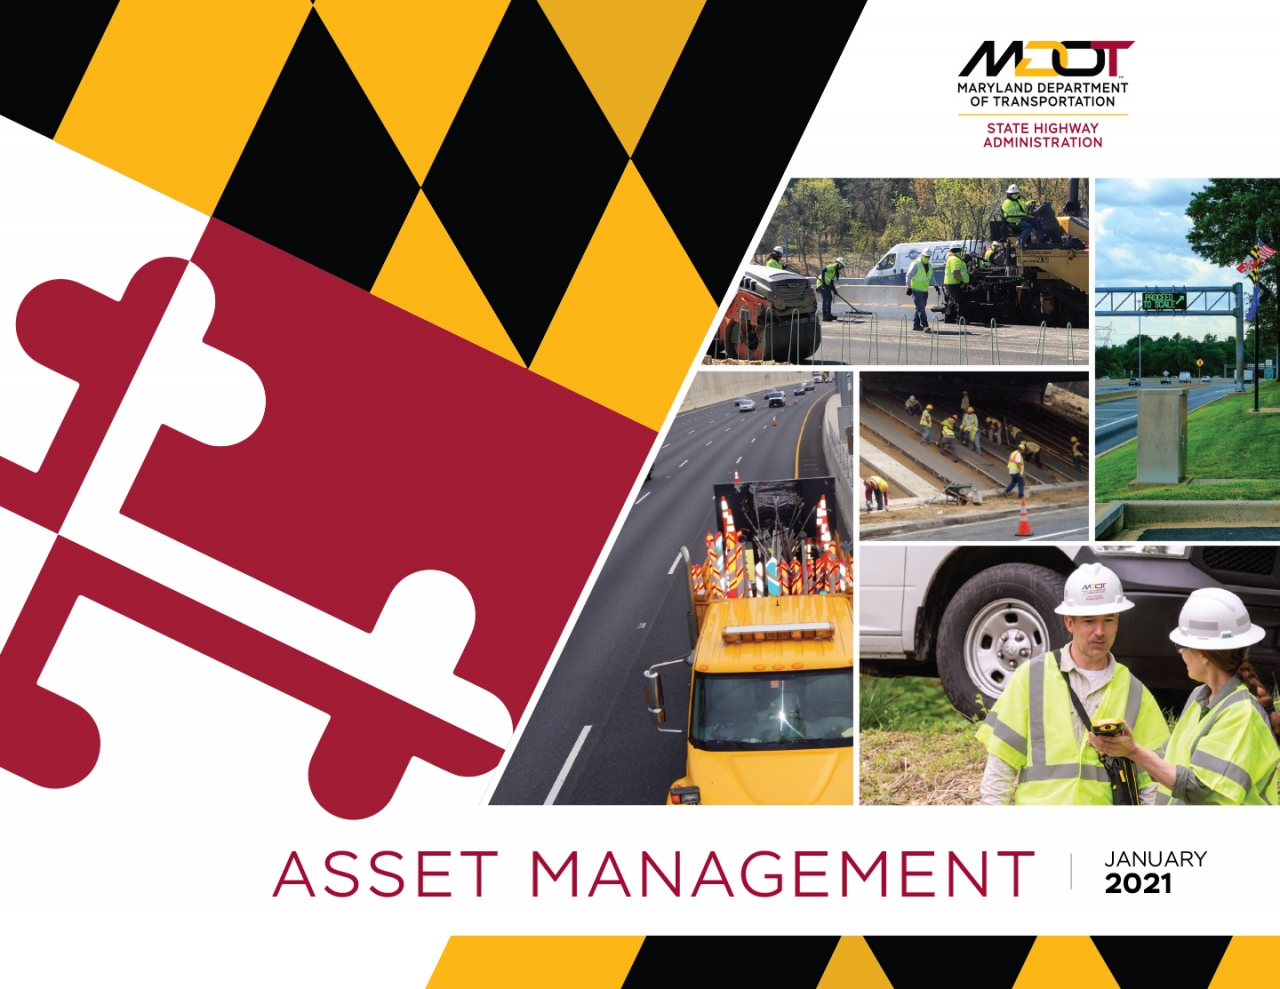 ©MARYLAND DEPARTMENT OF TRANSPORTATION I WSP helped the Maryland Department of Transportation create the Asset Management informational brochure for the State Highway Administration.